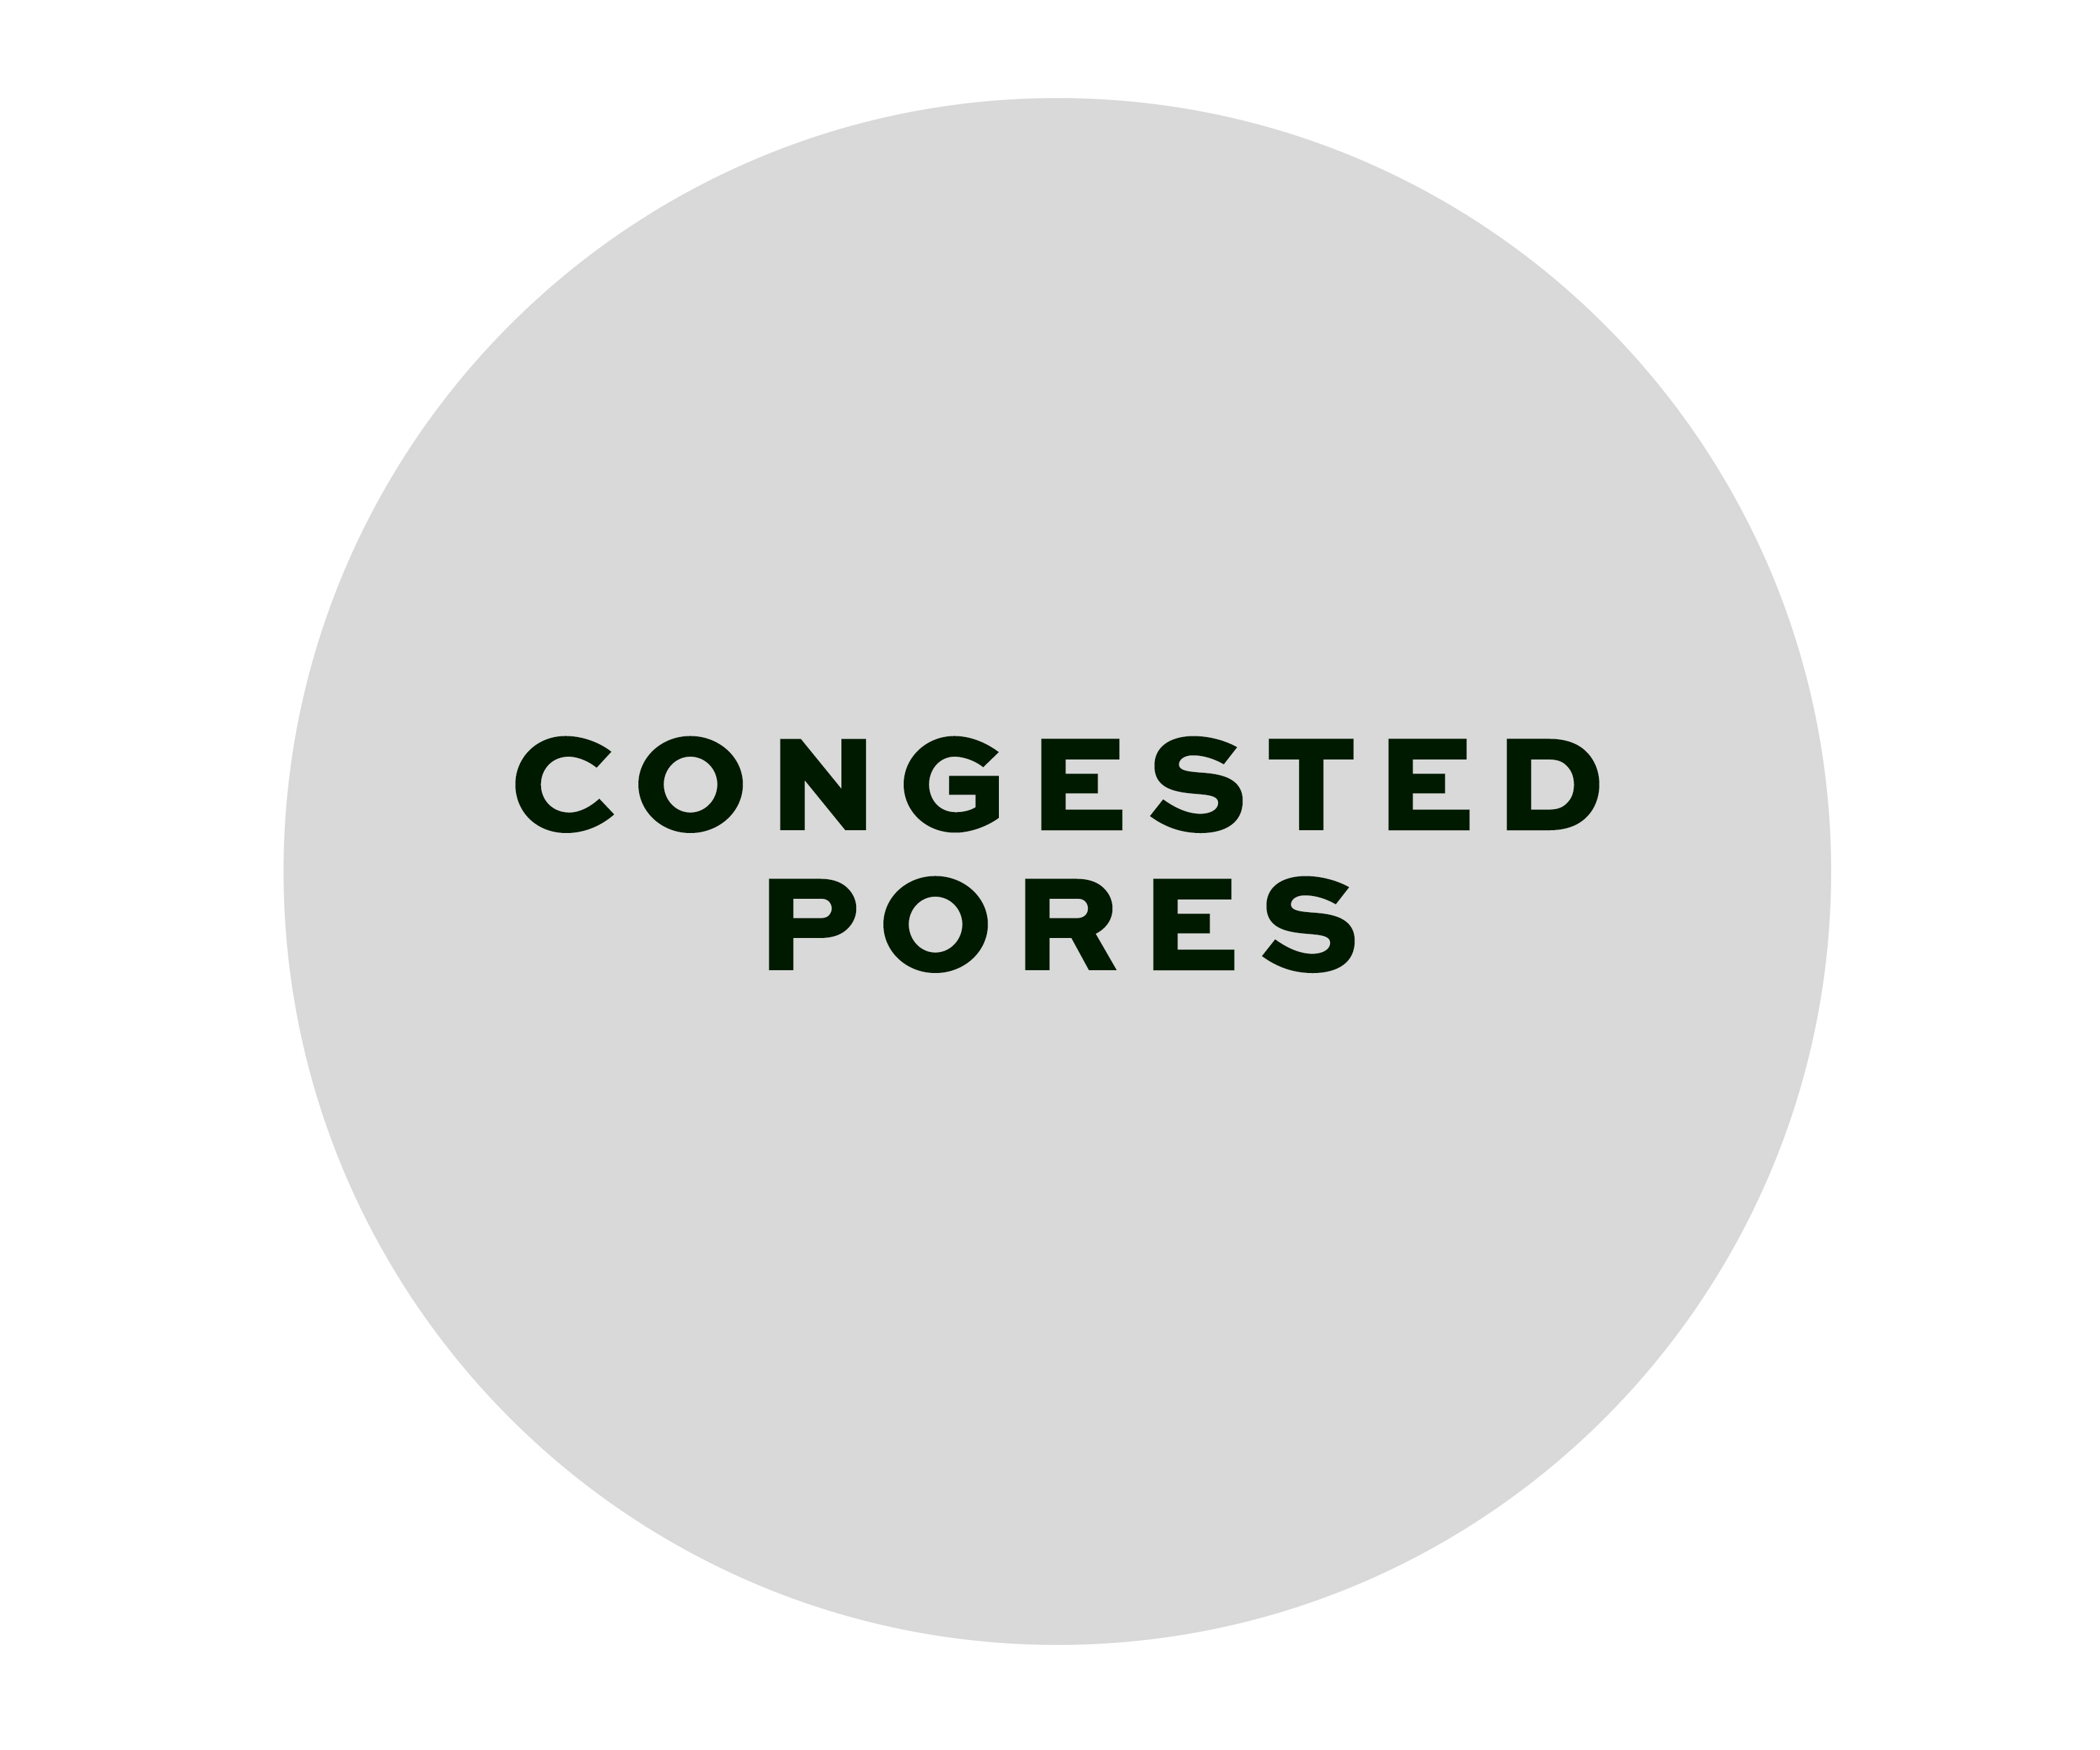 Congested pores